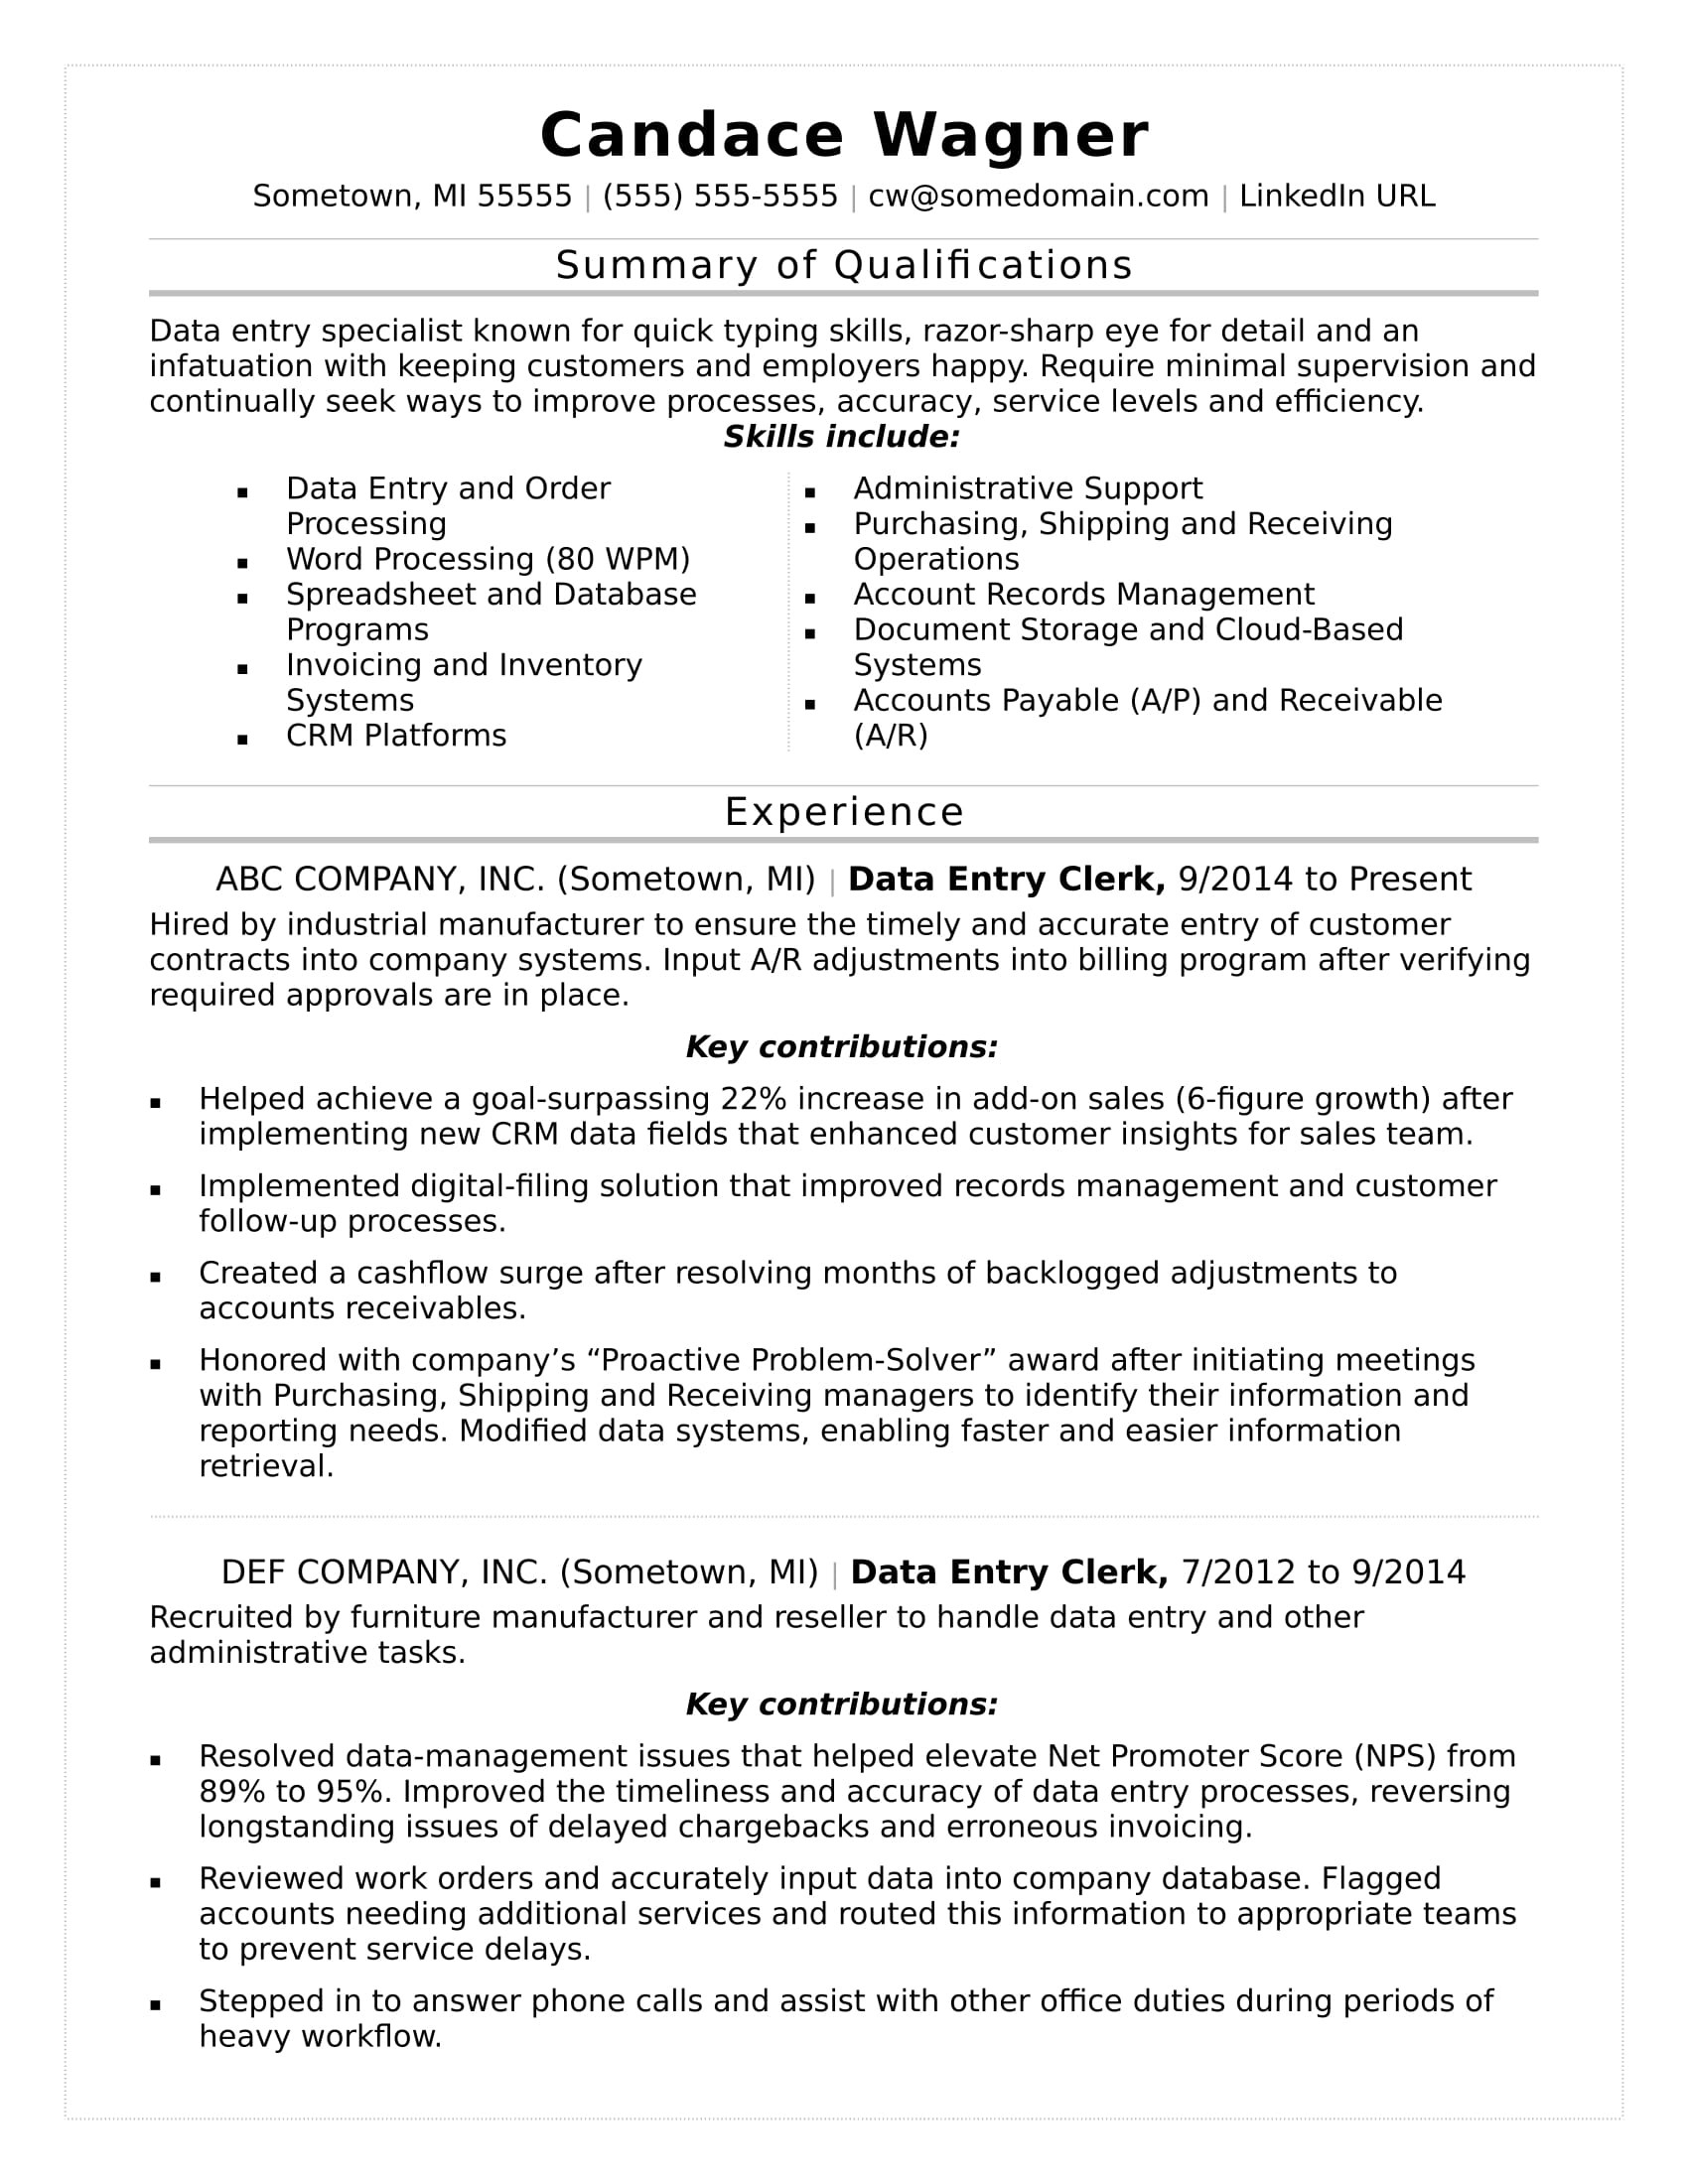 Data Entry Resume Sample with Experience Data Entry Resume Sample Monster.com